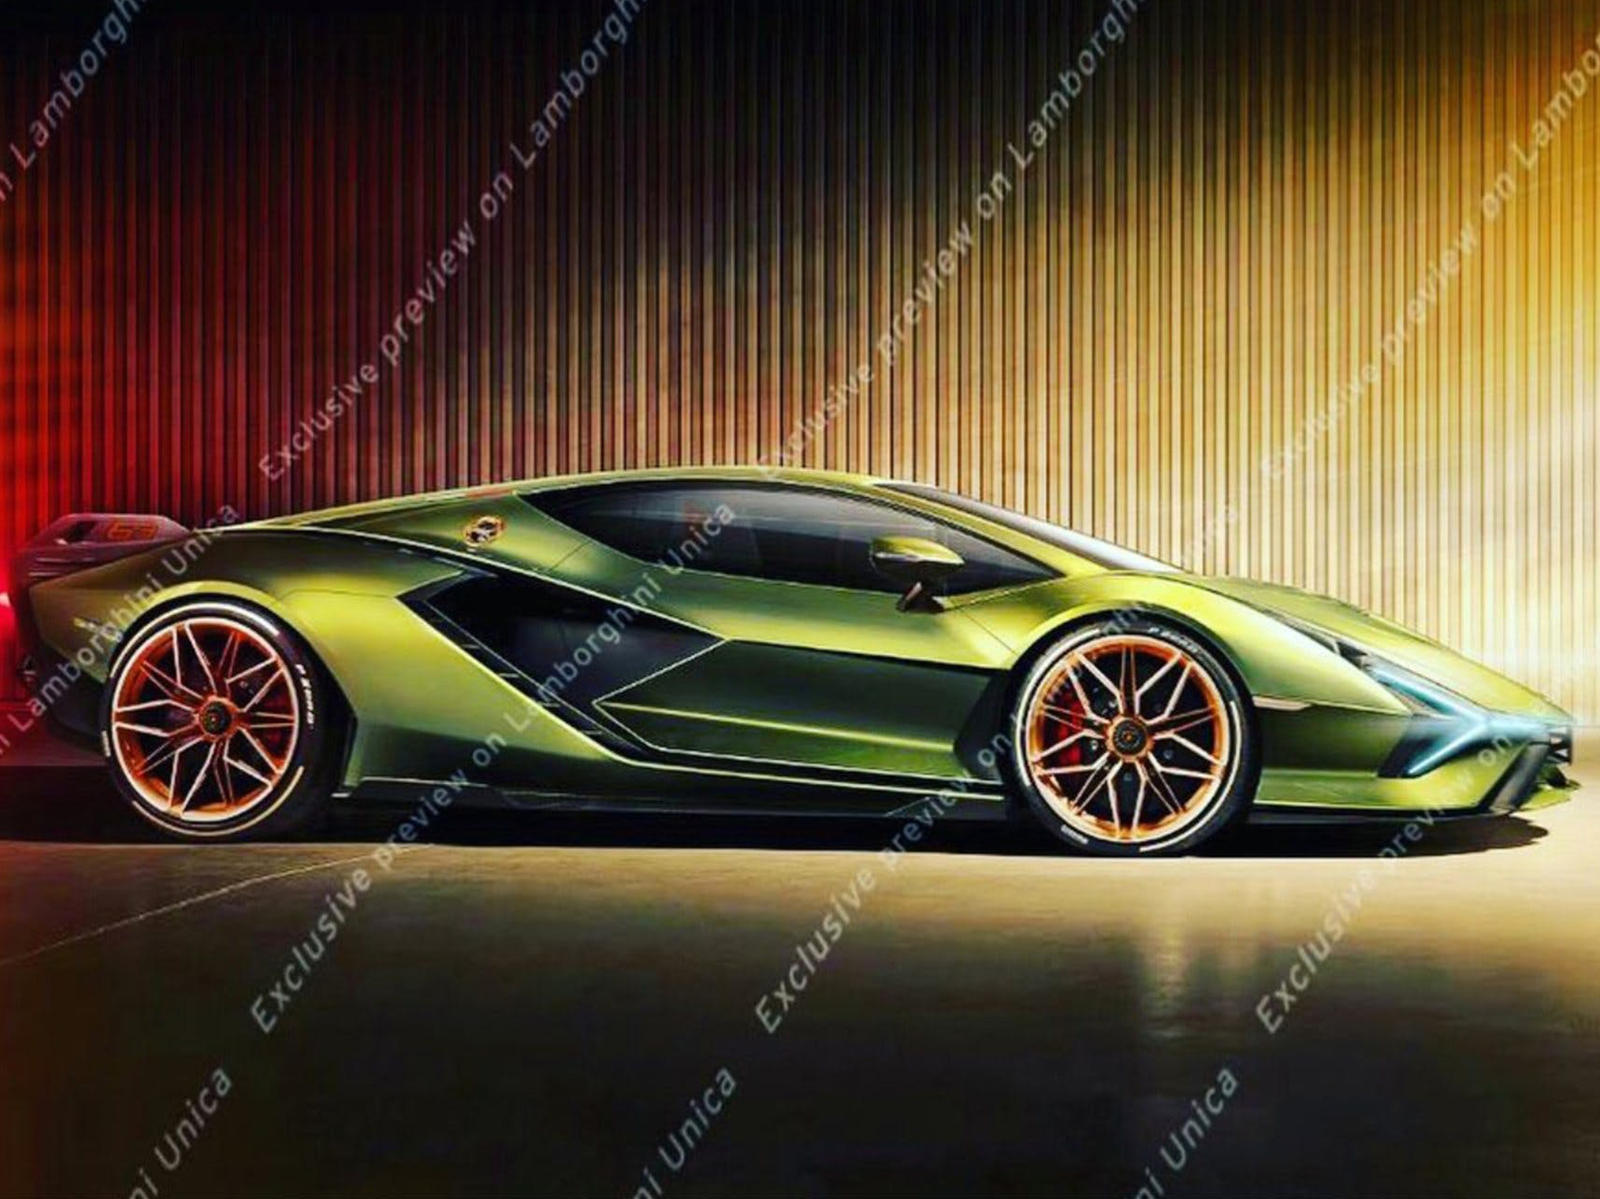 LEAKED: The Lamborghini Sian Is Here With A $3.6 Million ...